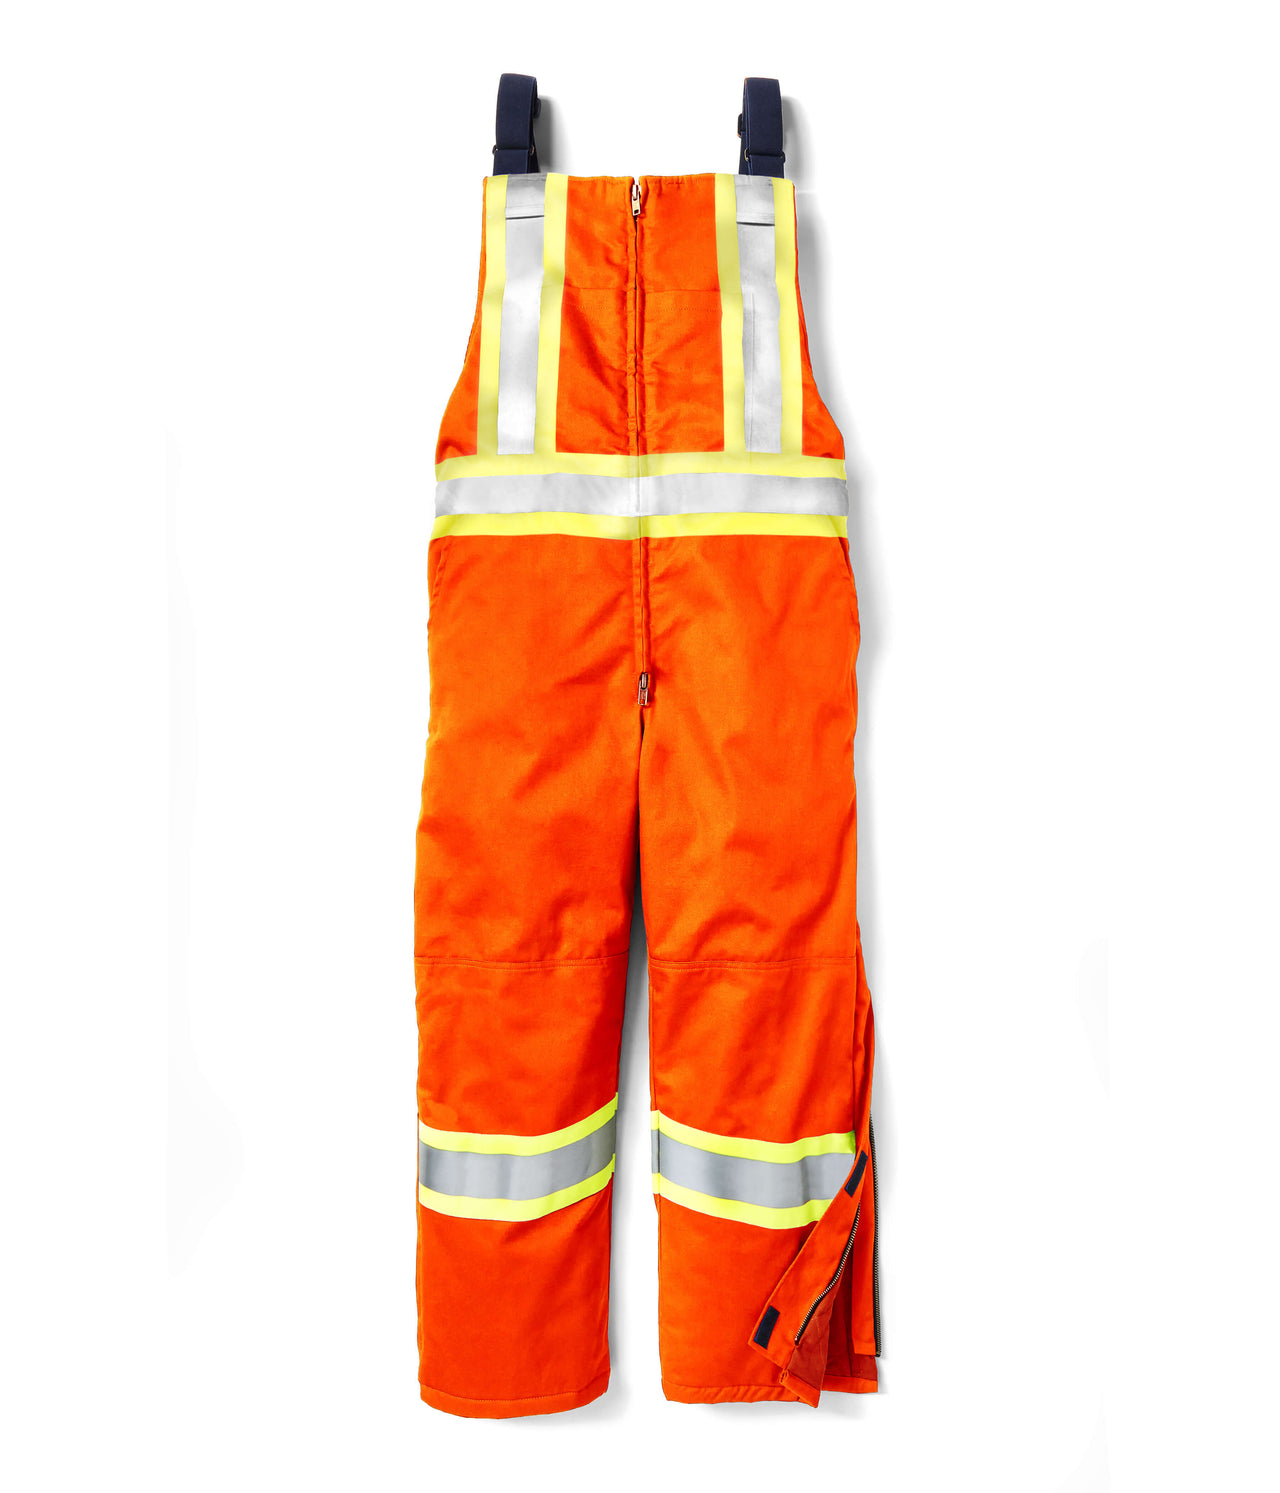 Rasco FR Hi Vis Orange Insulated Bib Overall with 4" Reflective Tape FR6706OH